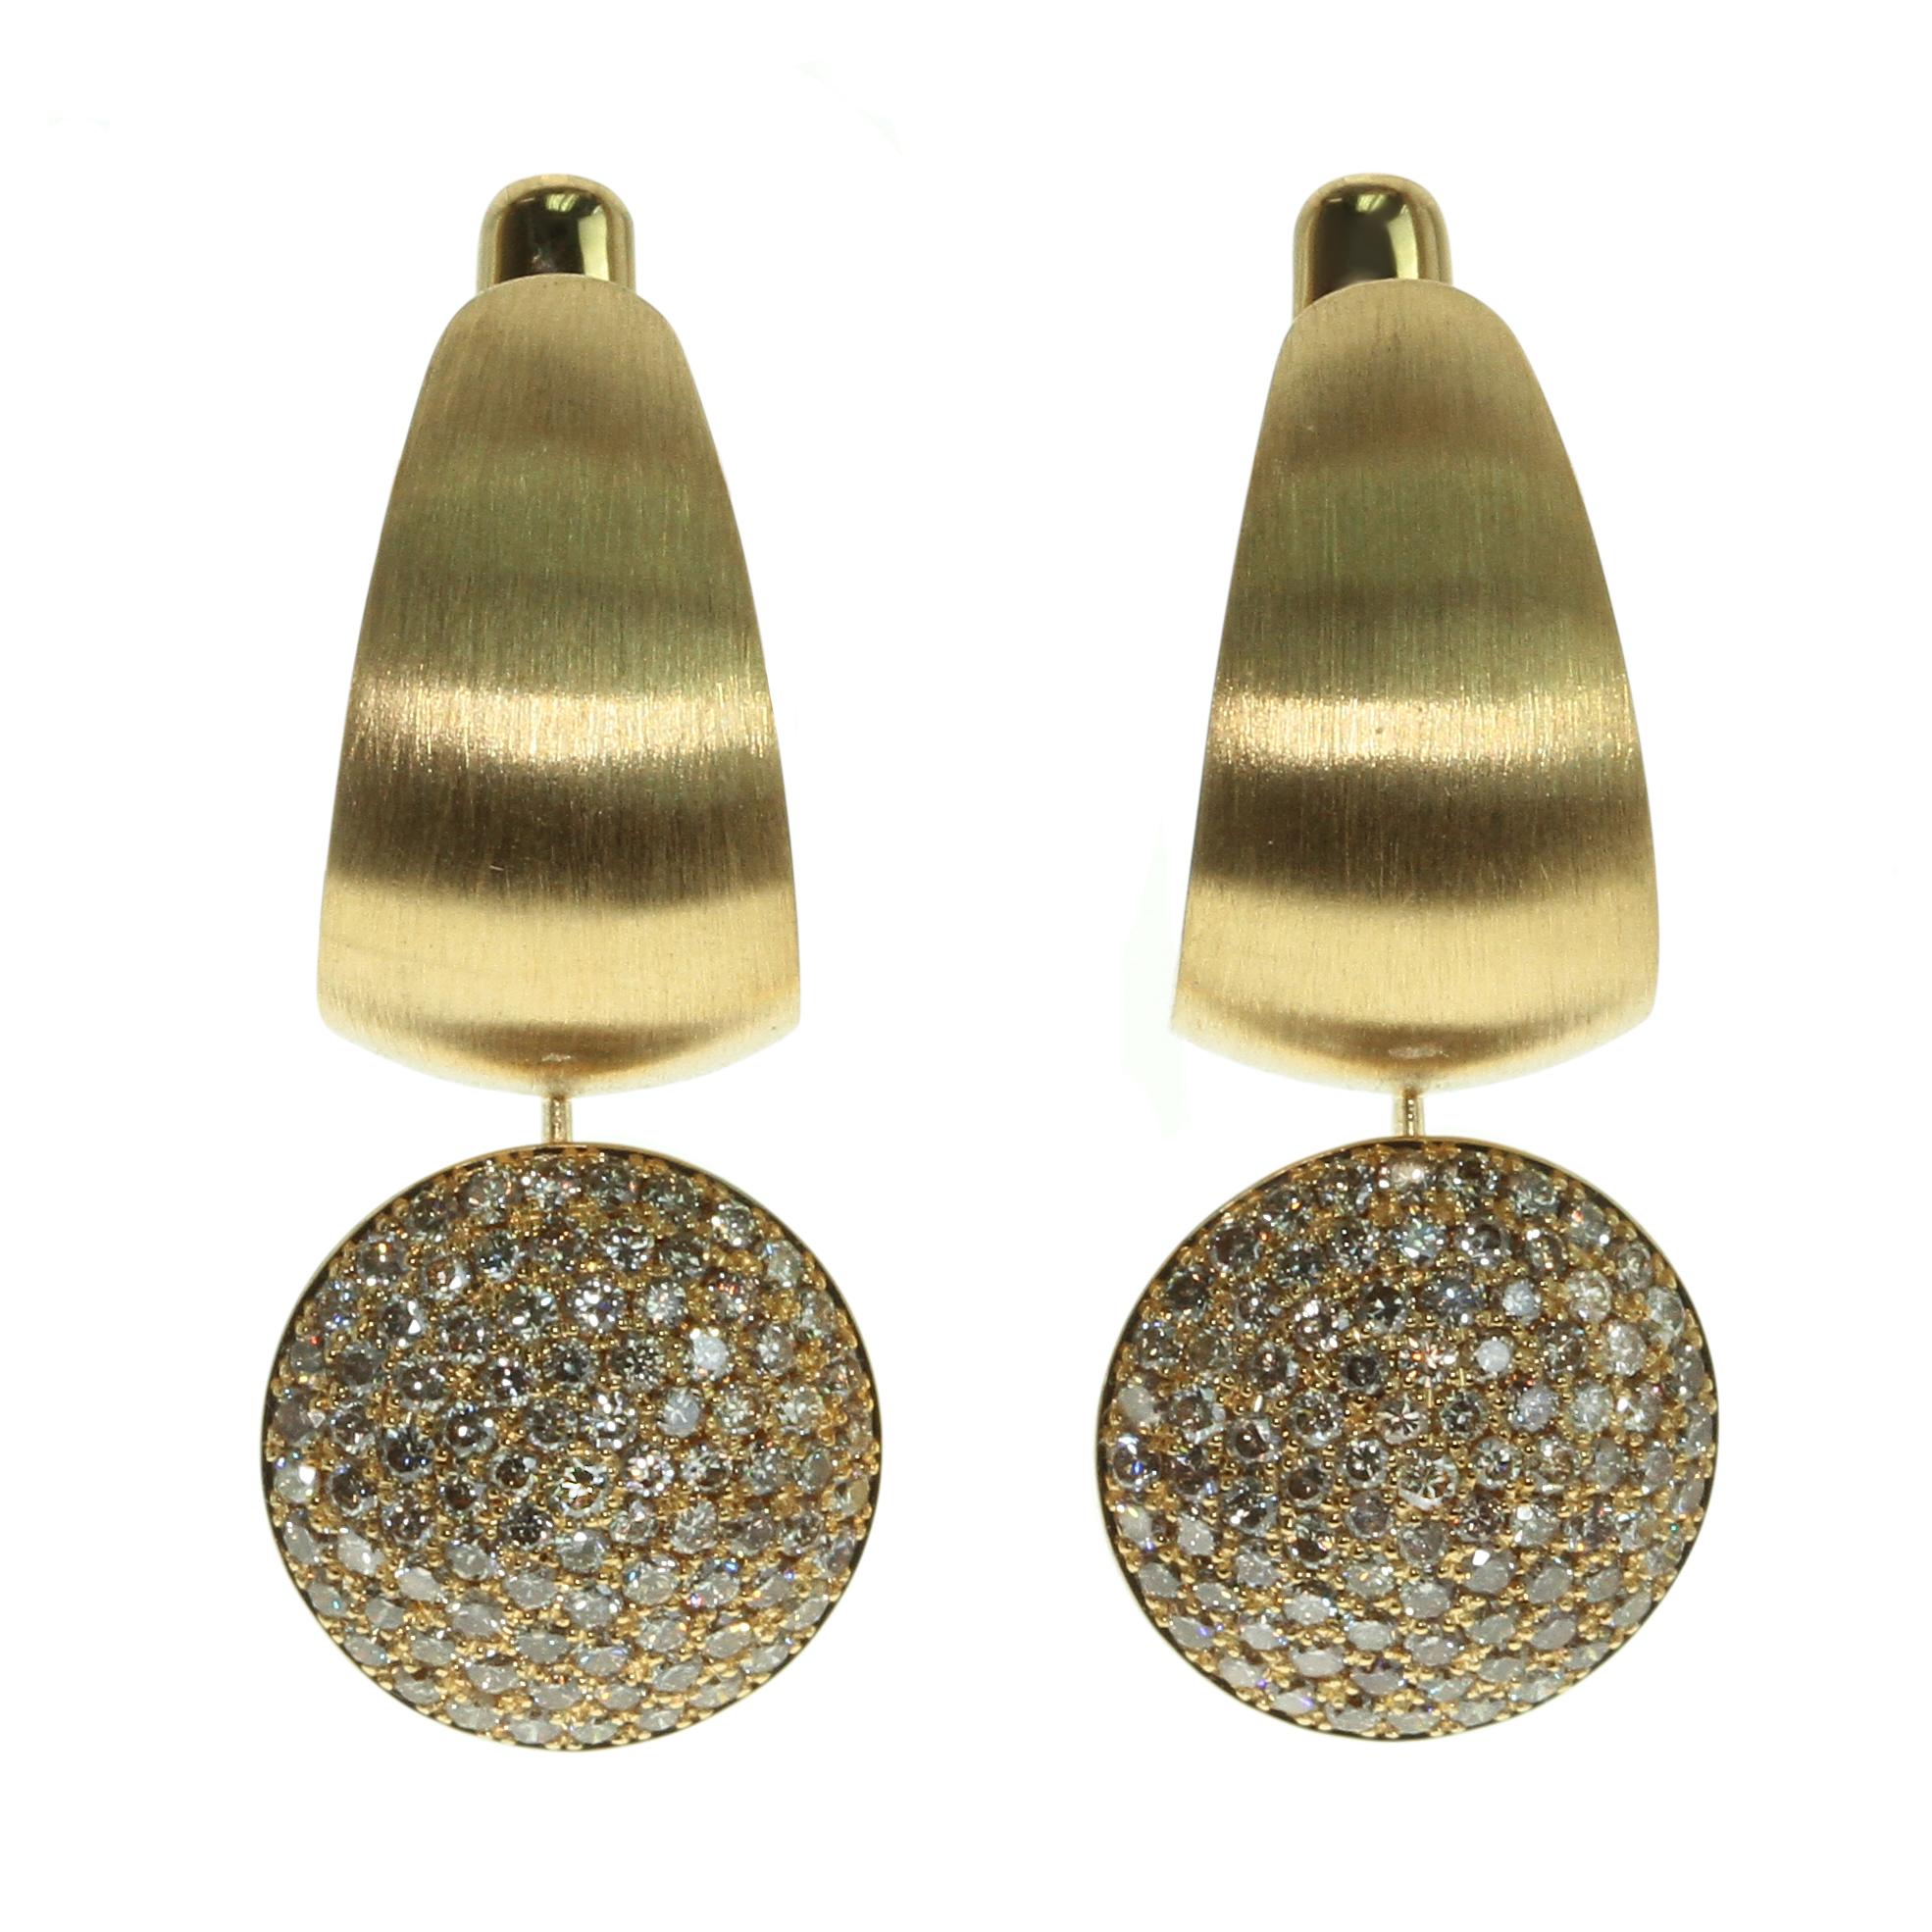 Diamonds Colored Enamel 18 Karat Yellow Gold Kaleidoscope Ring Earrings Suite

Please take a look at one of our trade mark texture in Kaleidoscope Collection - 